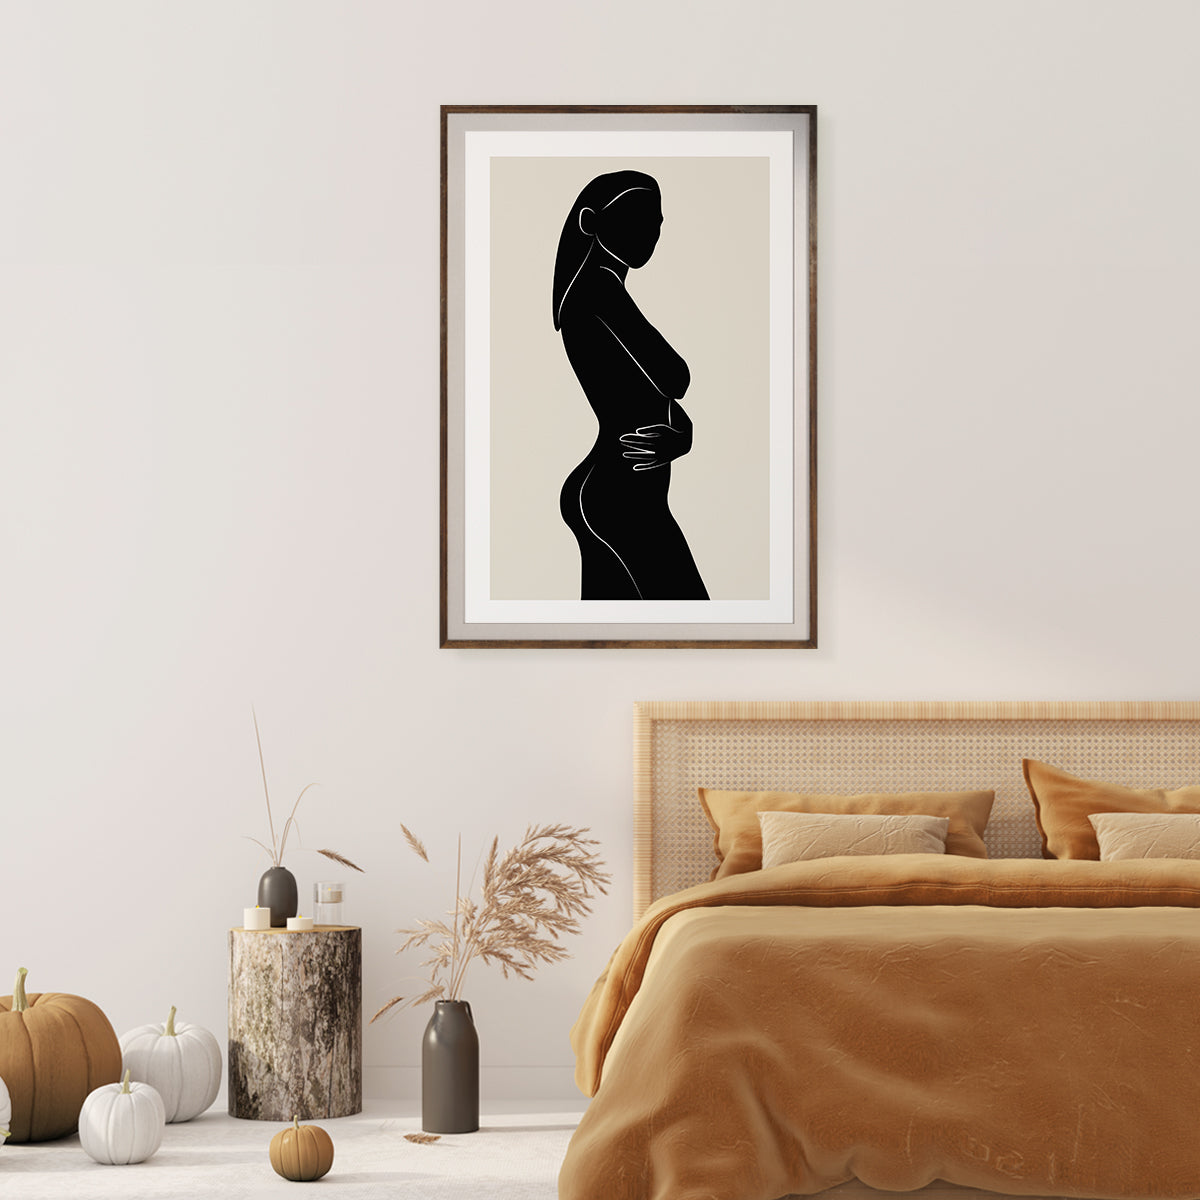 Women Silhouette Boho Art Posters For Home Decor-Vertical Posters NOT FRAMED-CetArt-8″x10″ inches-CetArt